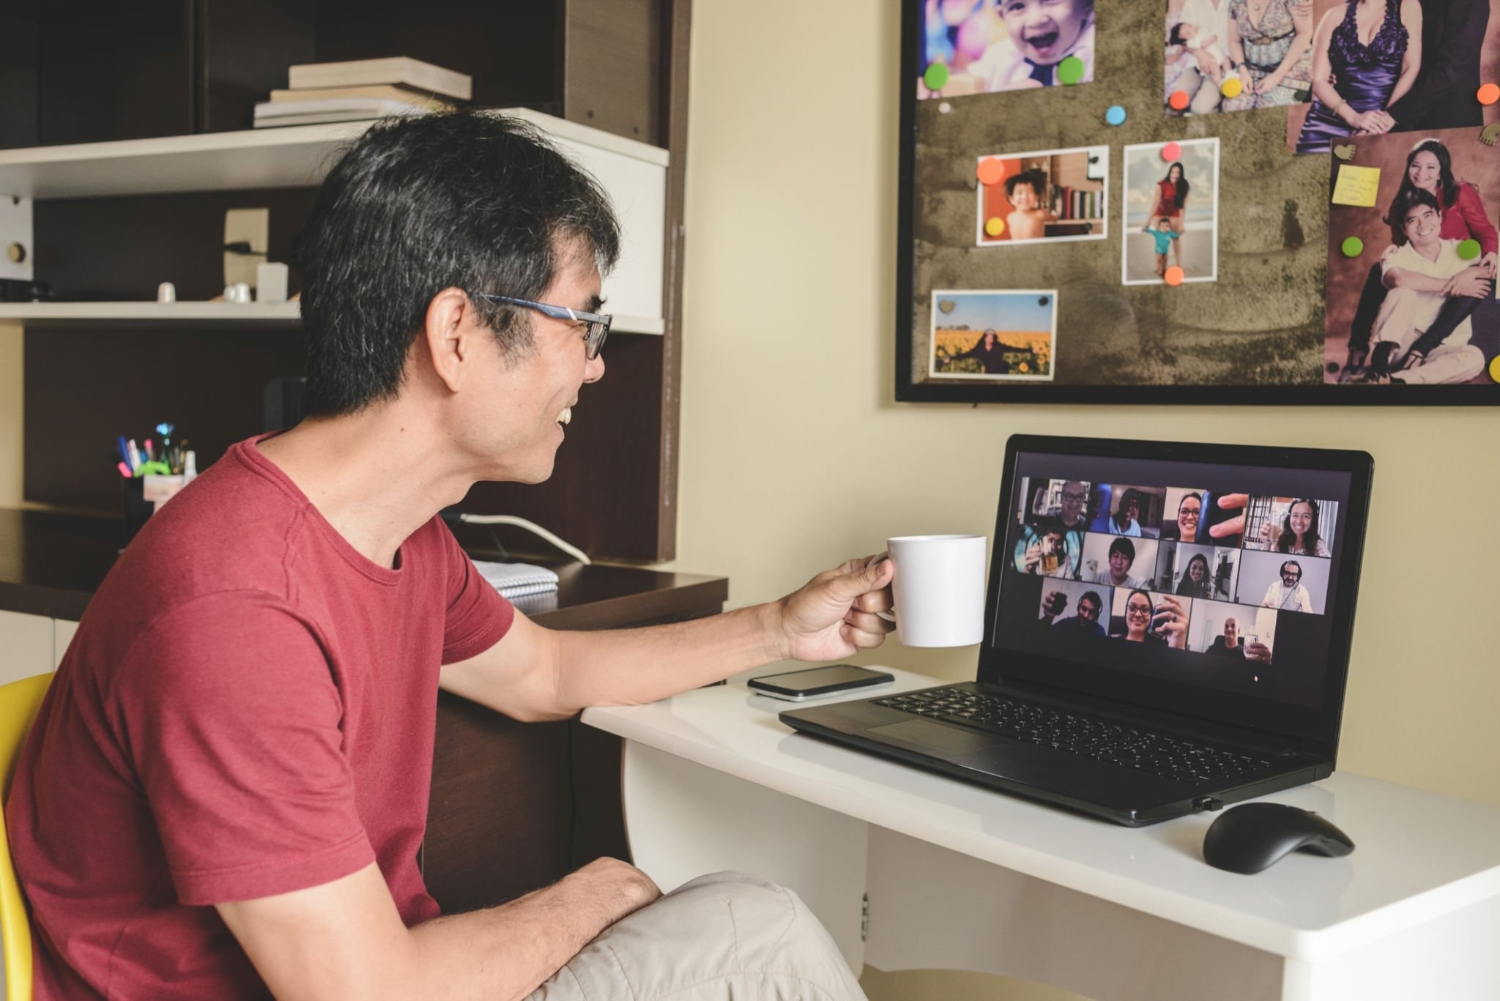 Man at home attending to a virtual happy hour with many people on screen toasting online together